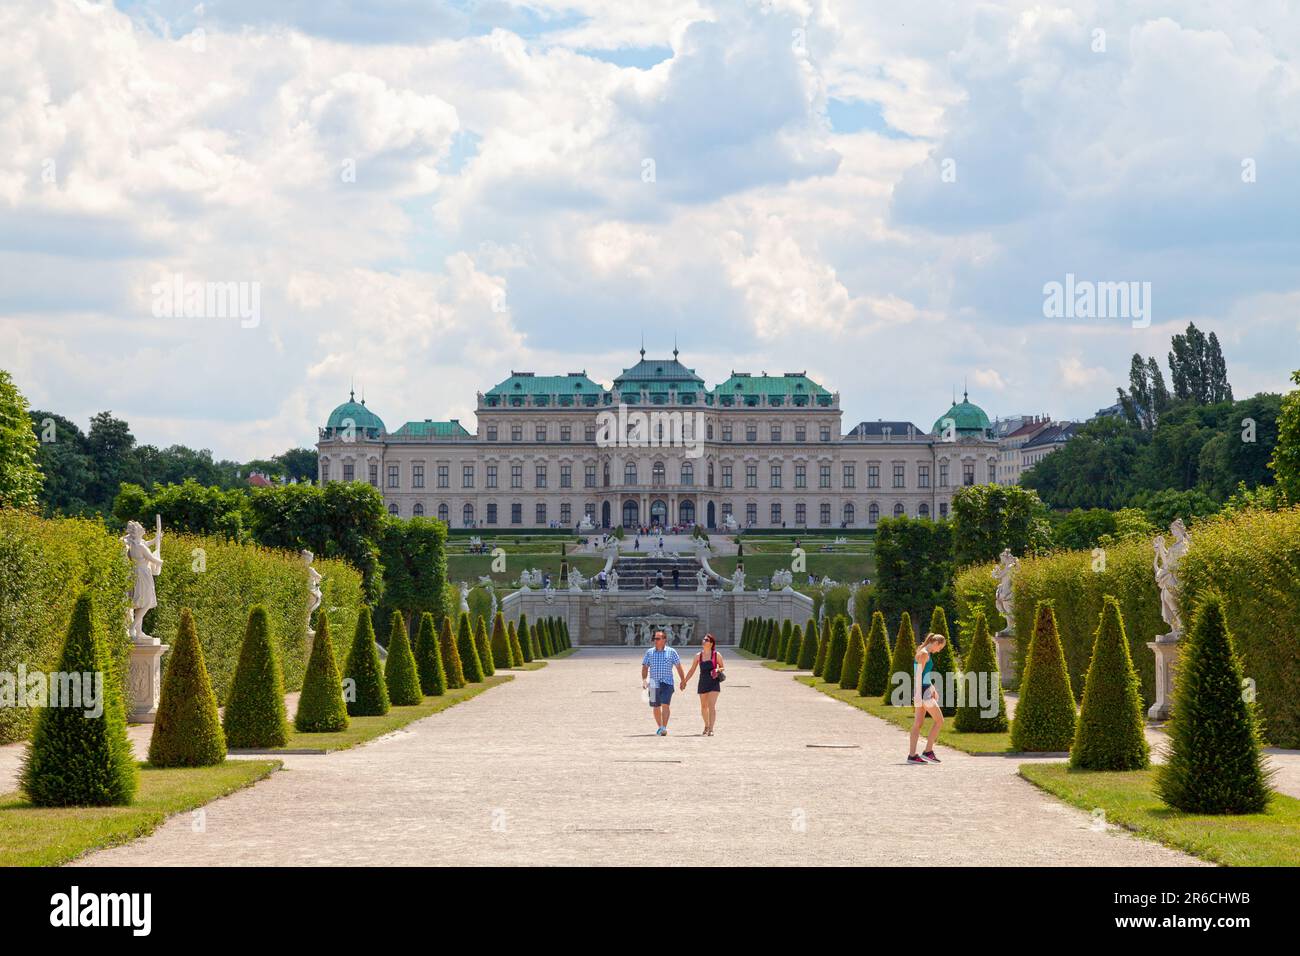 Vienna, Austria - June 17 2018: The Upper Belvedere is a Baroque palace built in the 18th-century, housing art from Middle Ages to today, with notable Stock Photo